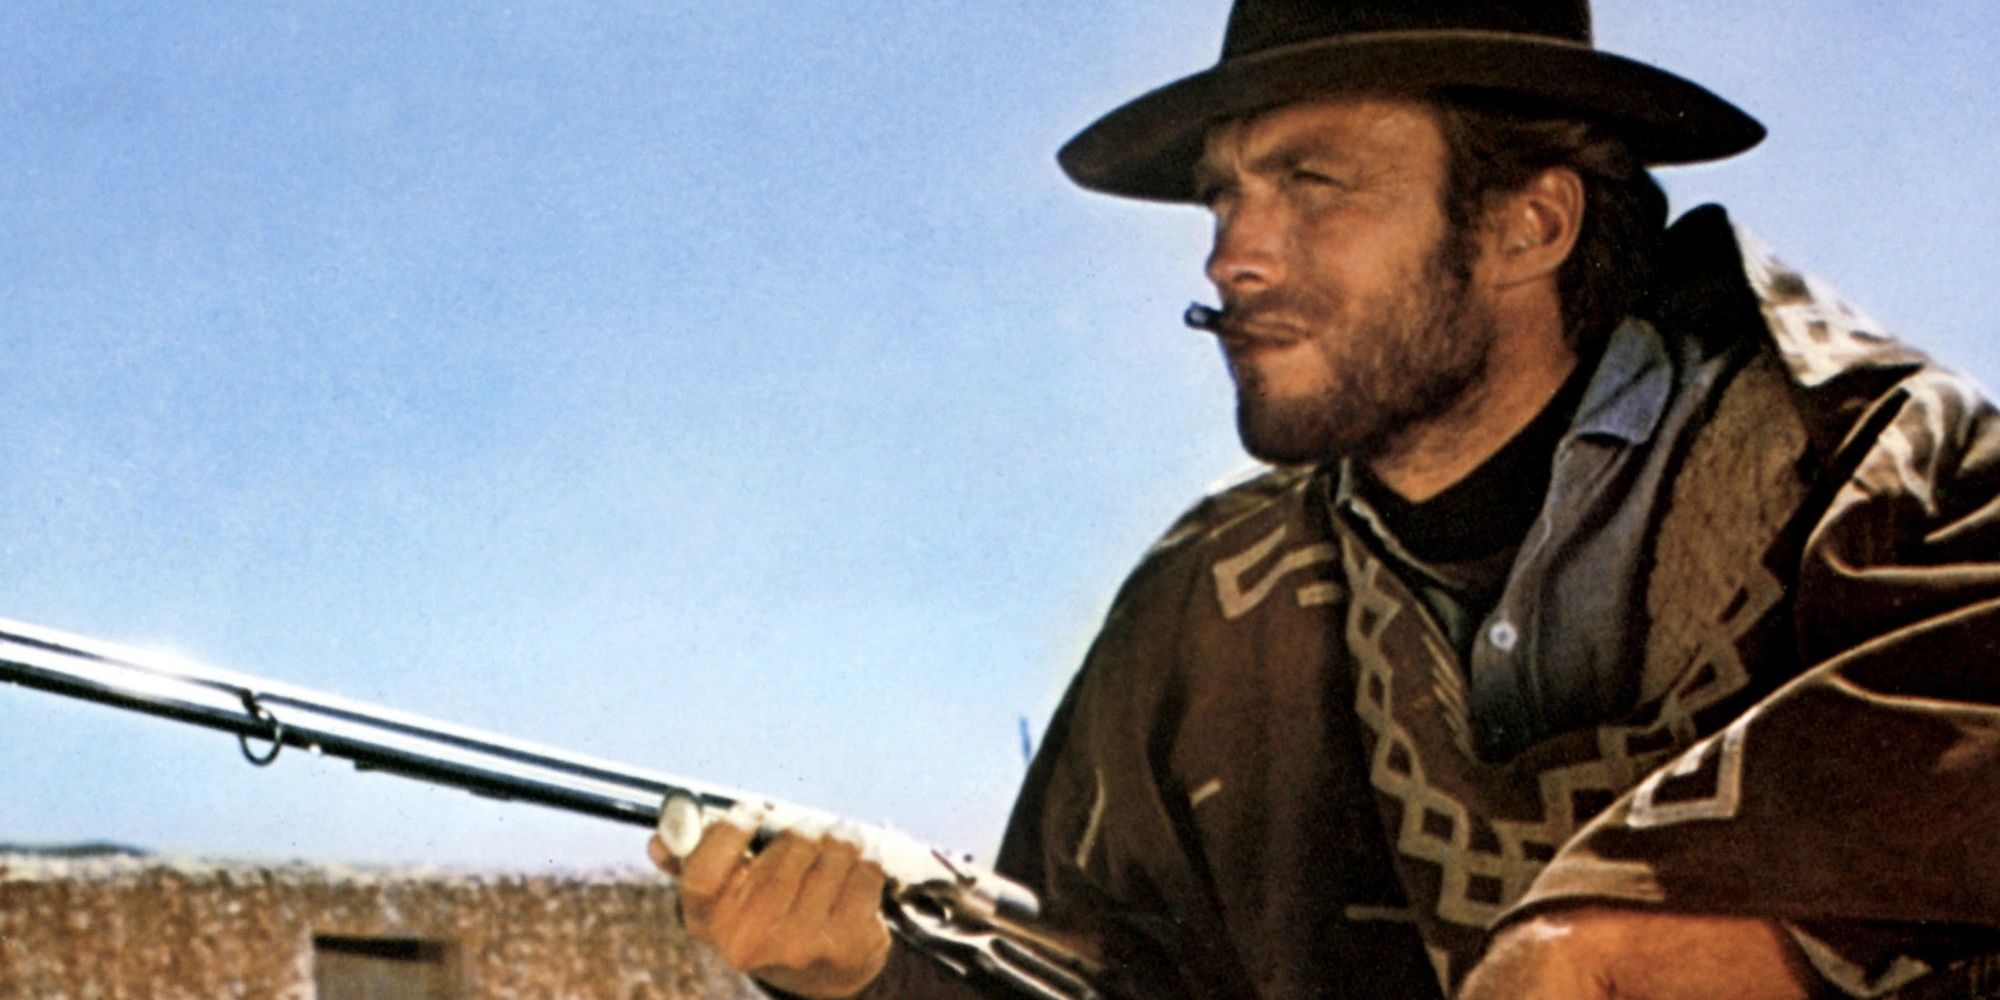 Clint Eastwood with a gun in Few A Few Dollars More